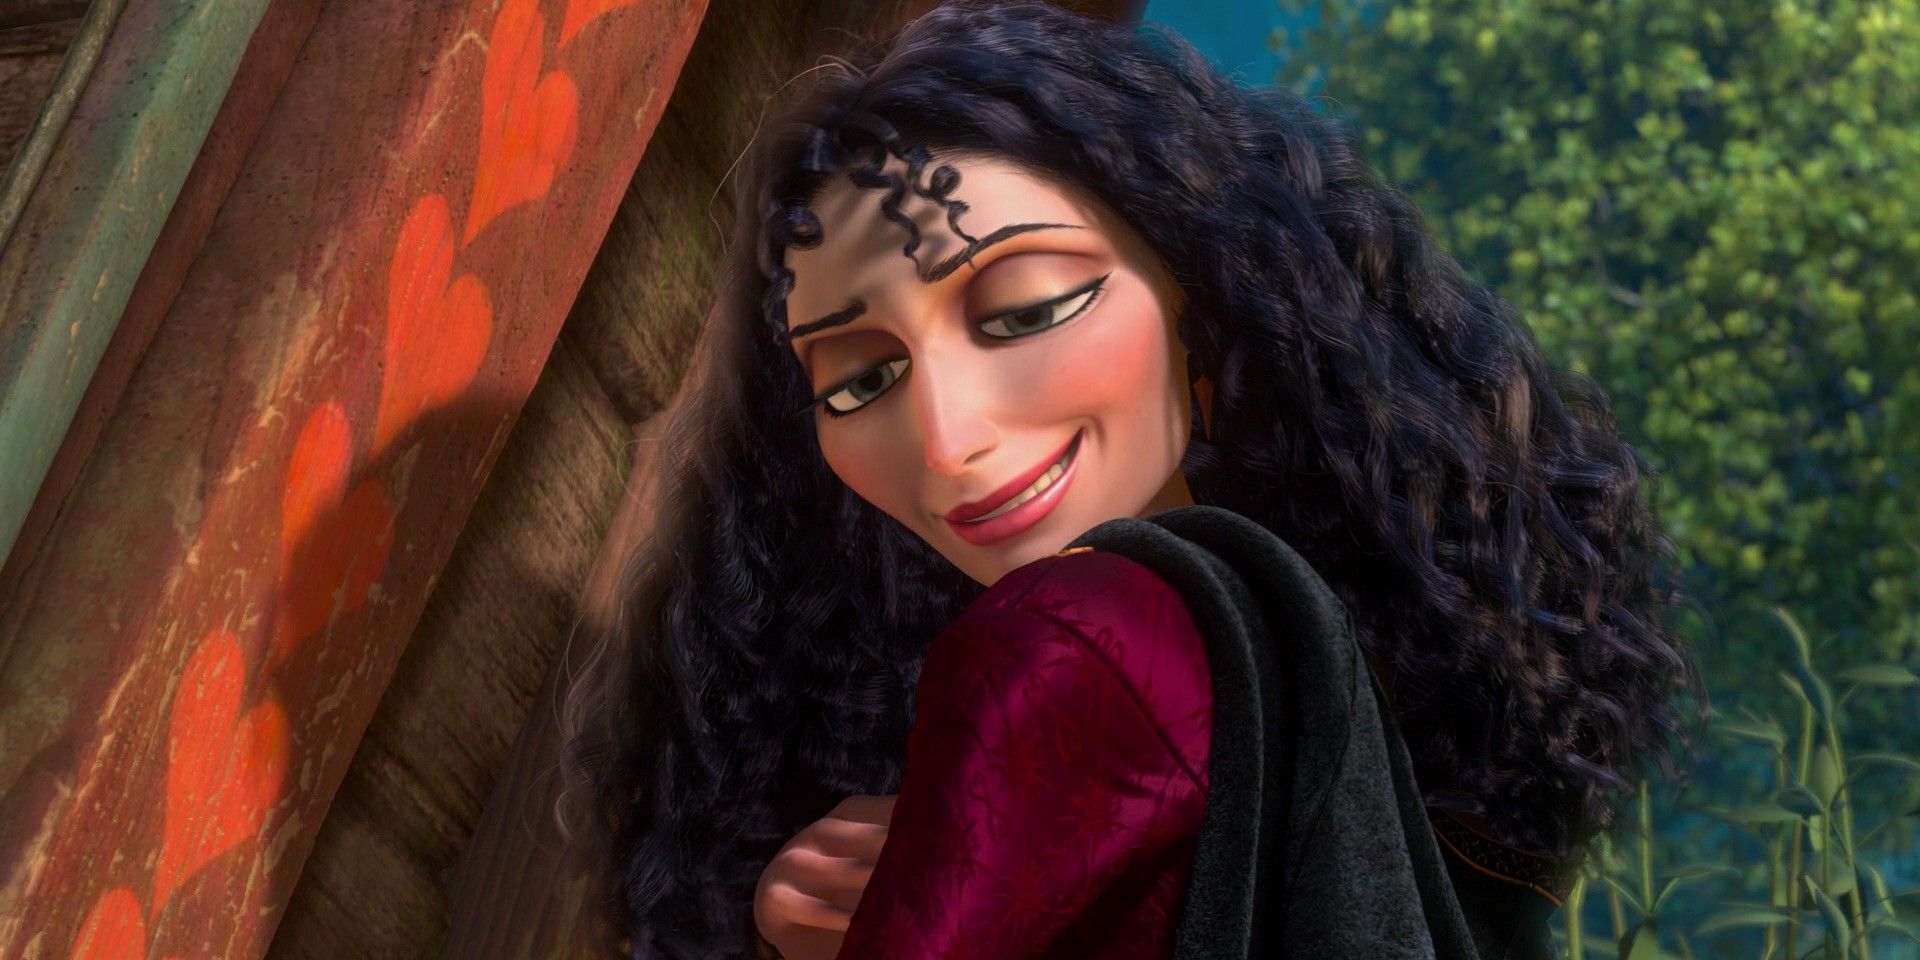 Mother Gothel smiling evilly in Tangled